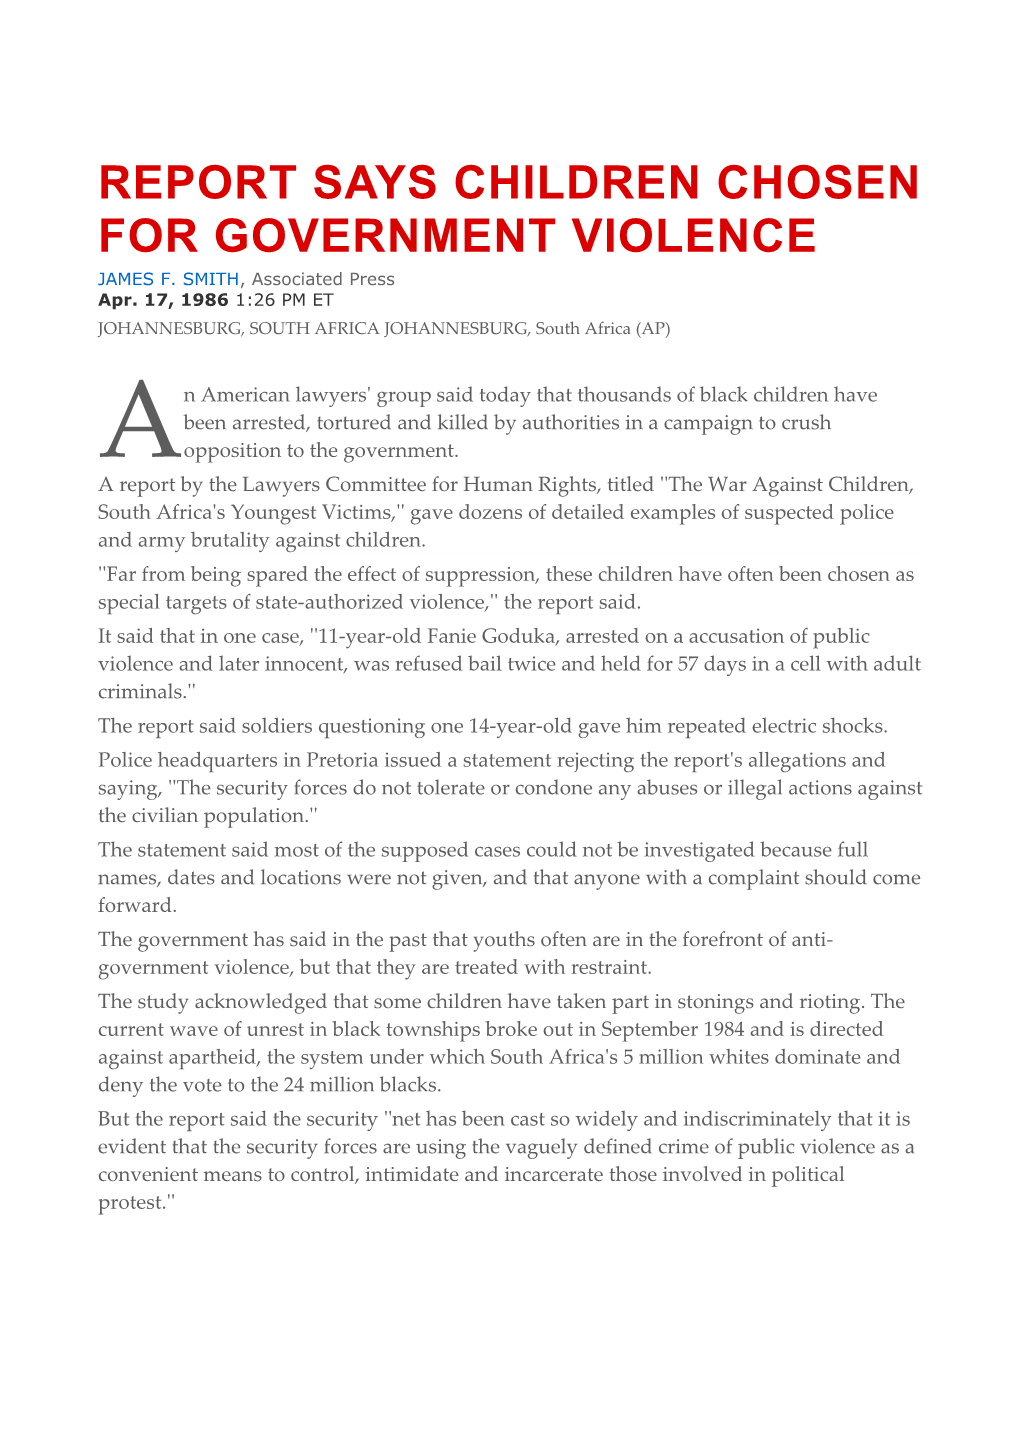 Report Says Children Chosen for Government Violence